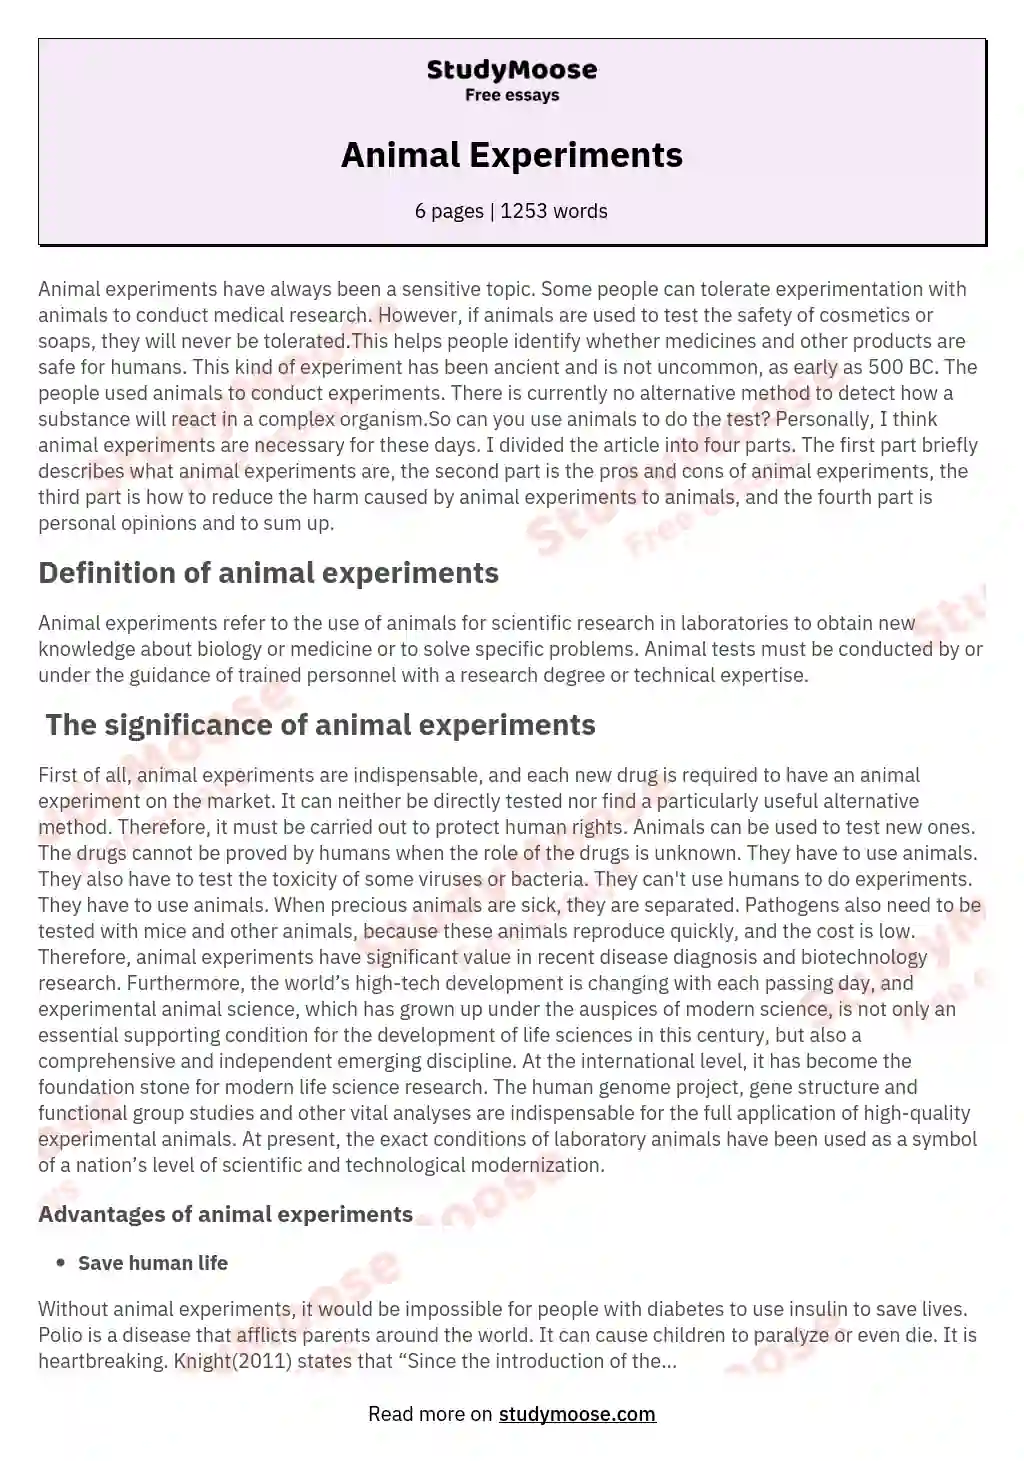 ielts essay about animal experiments